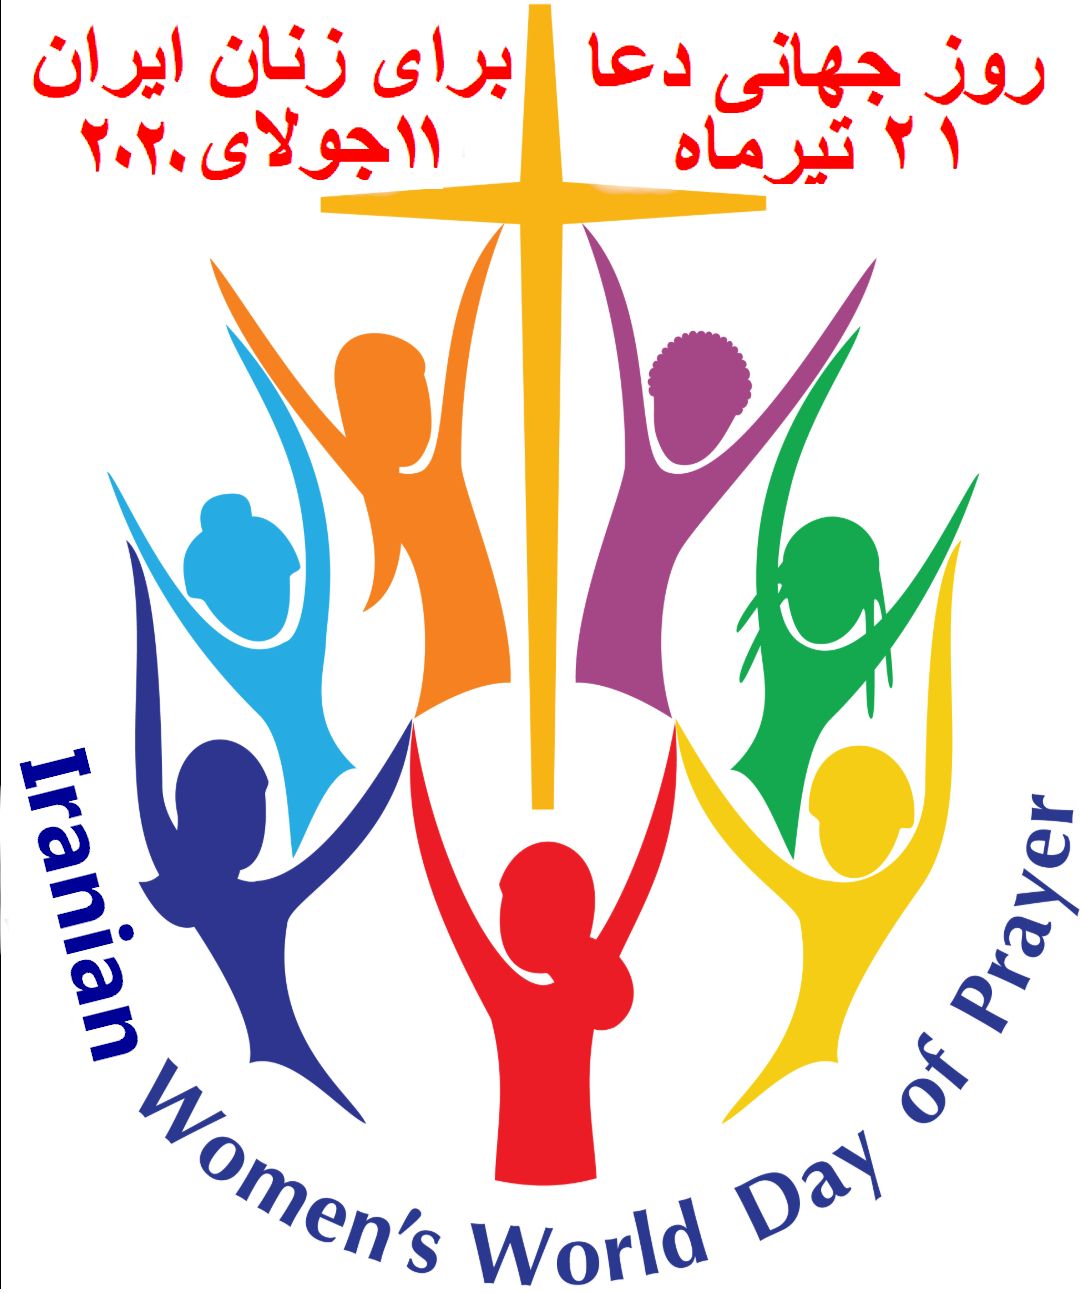 Iranian Women's Day of Prayer called by the Estheri, Agape & FarsiNet  Ministries - A Christian organization in Southern California